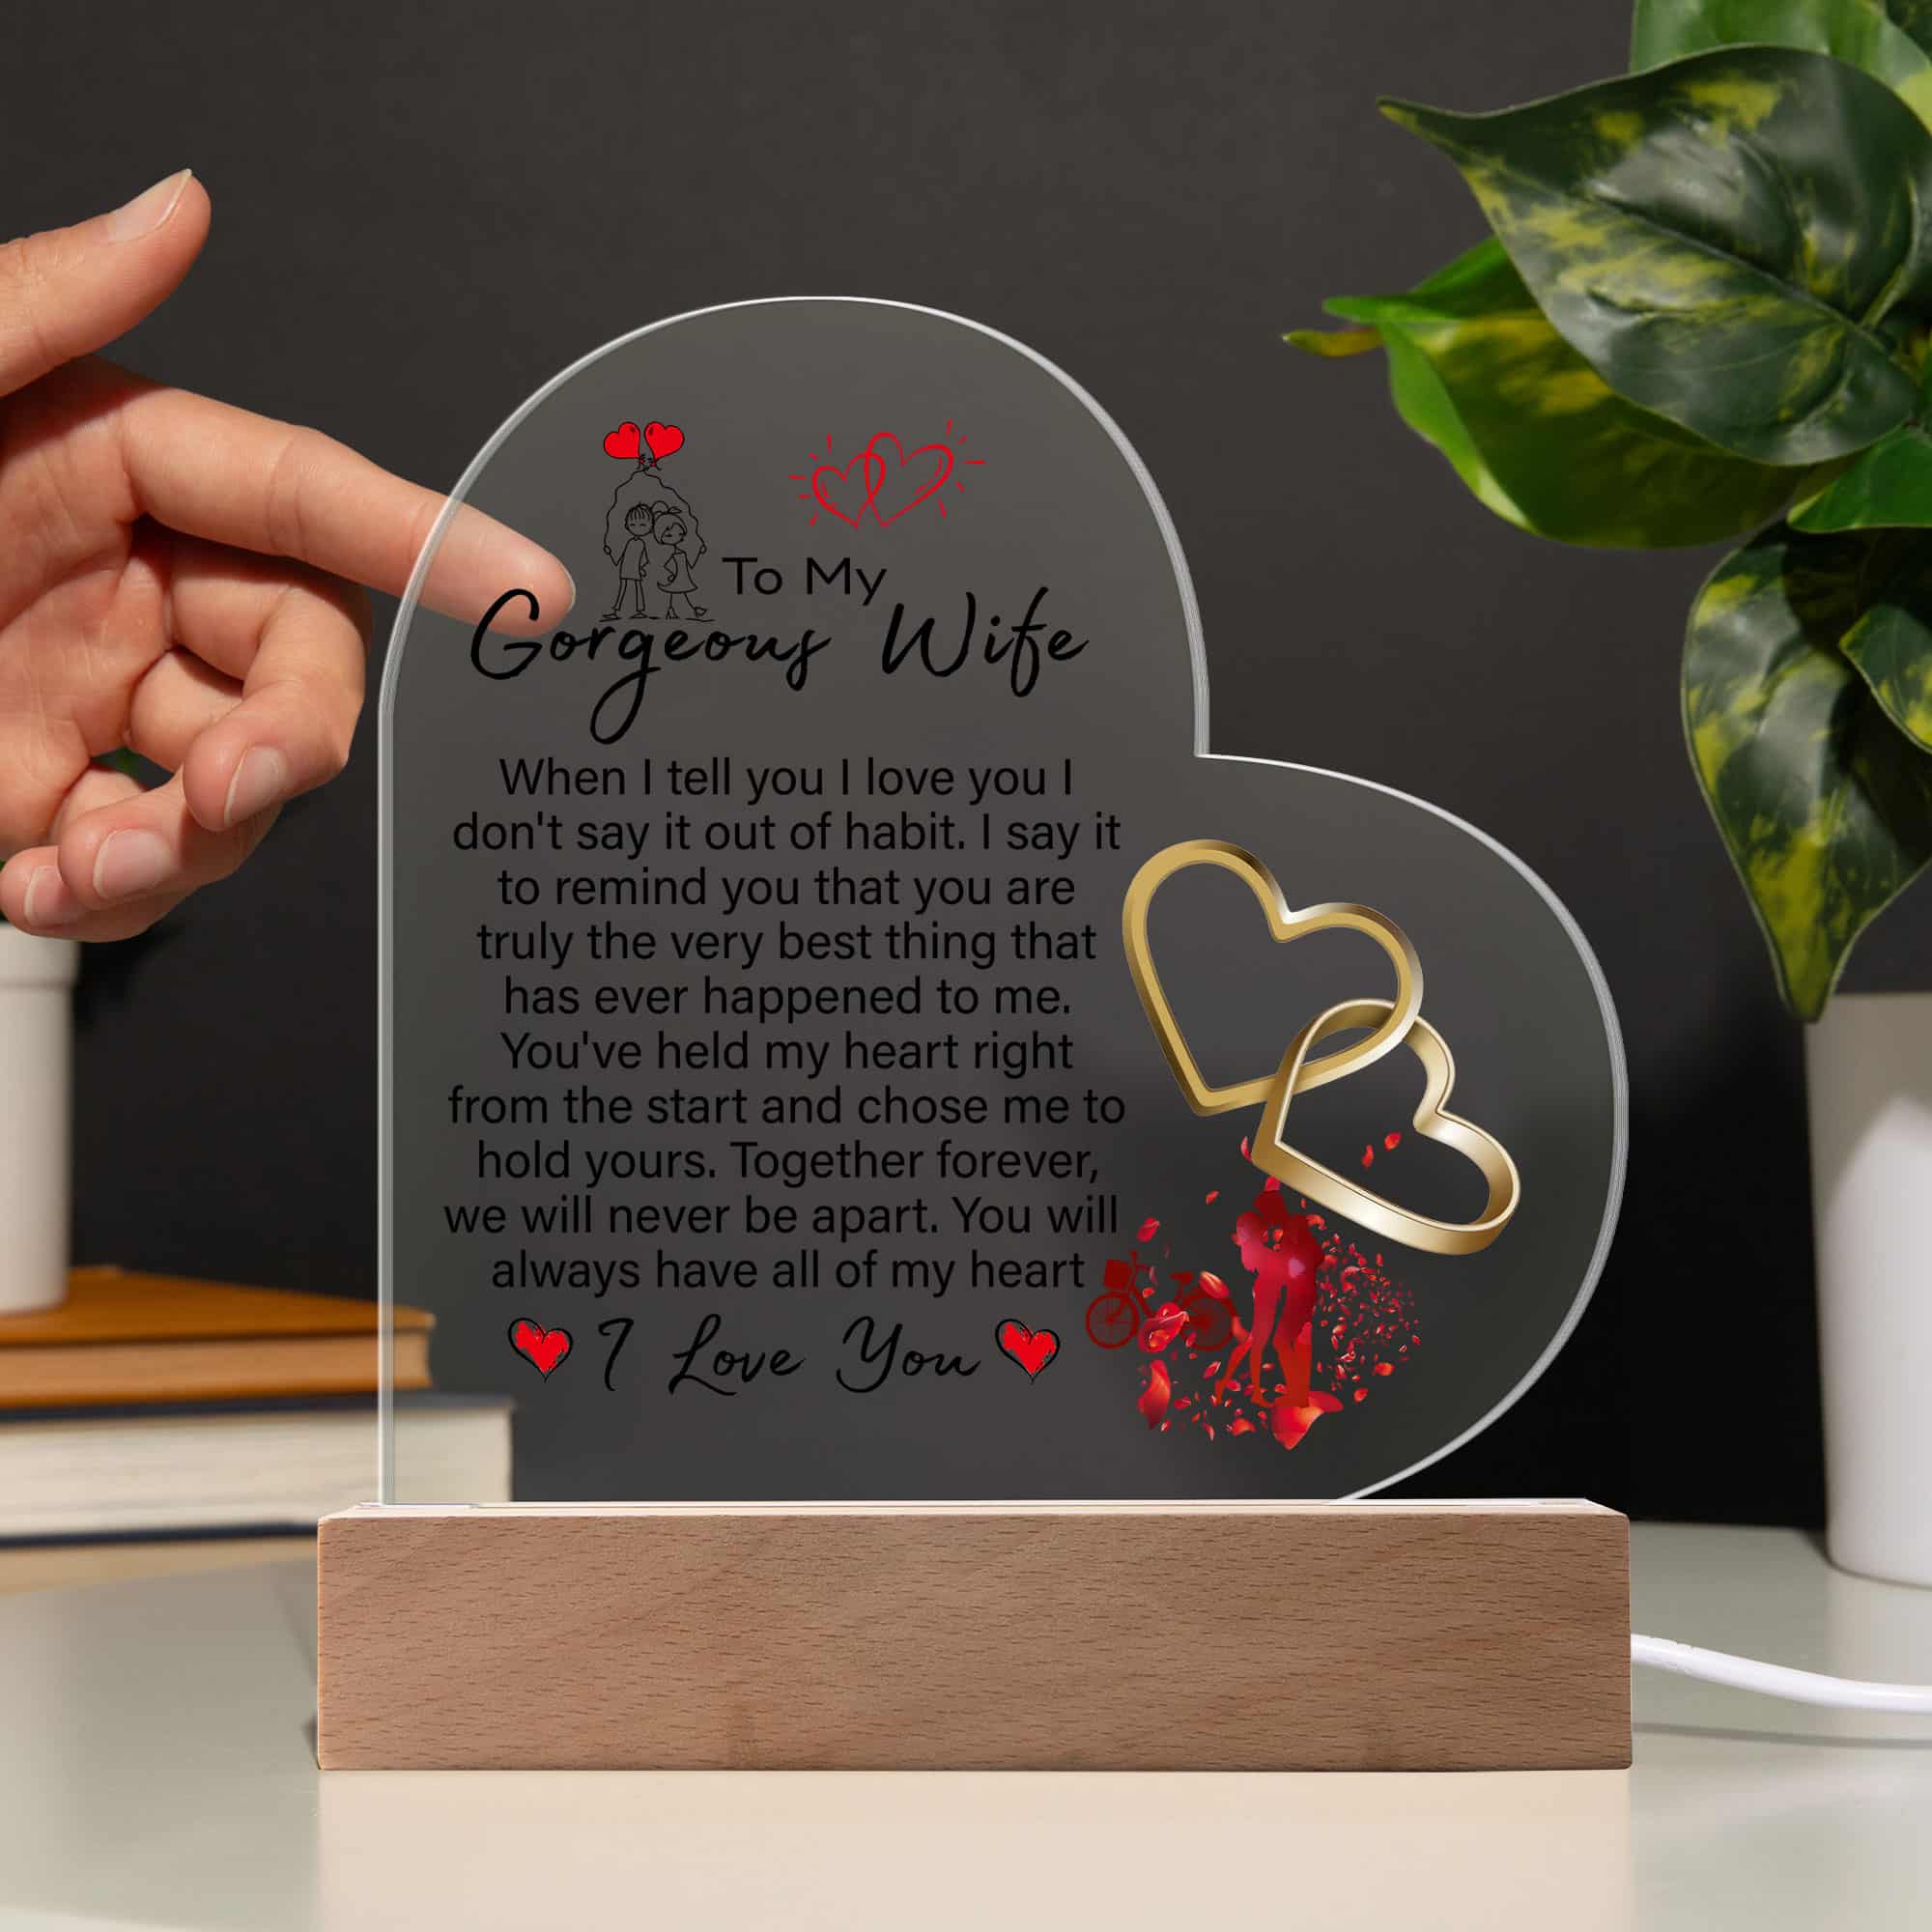 Acrylic Heart Plaque Romantic Gift For Gorgeous Wife - FavoJewelry